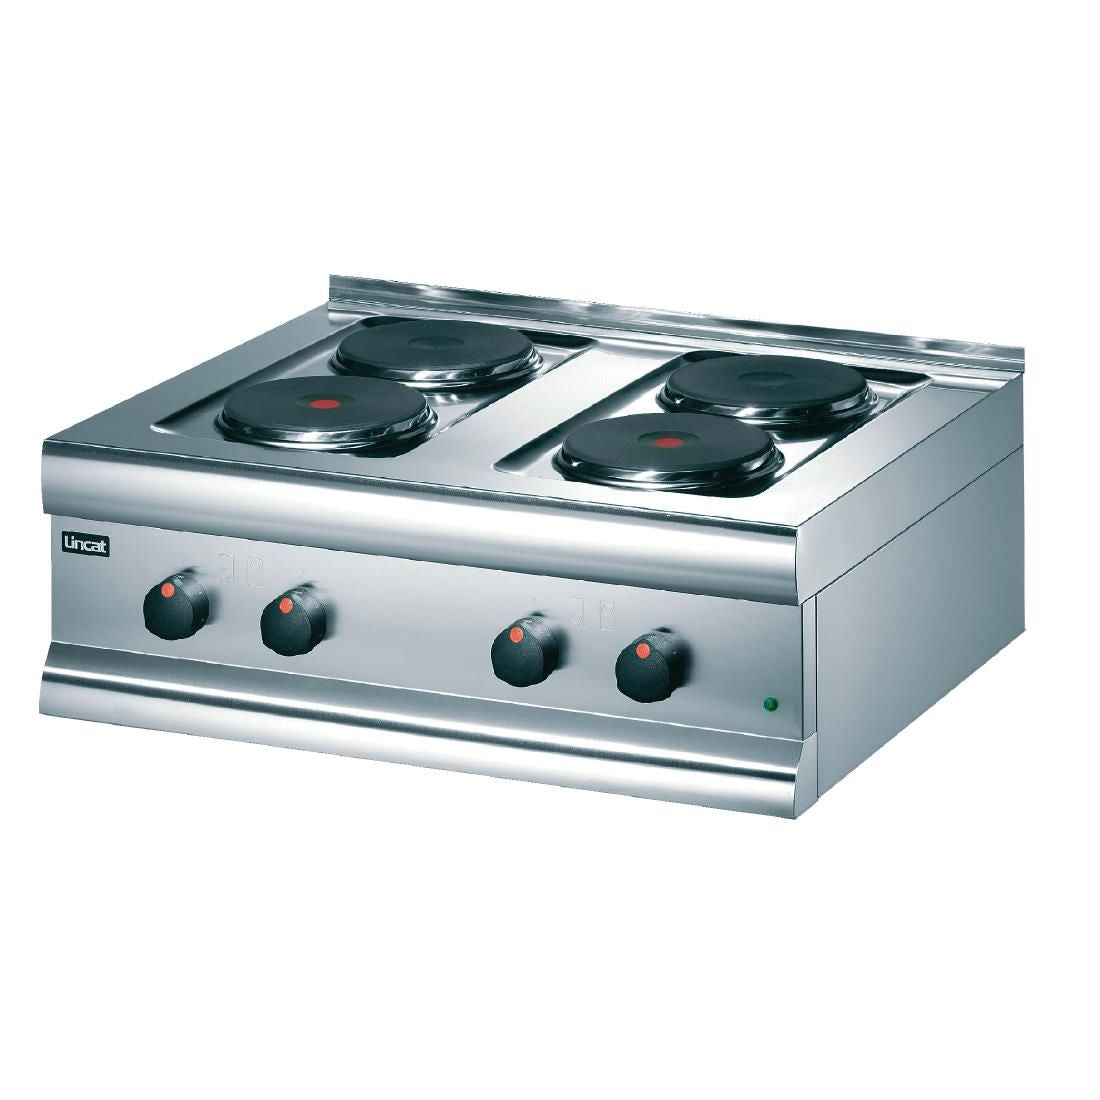 HT7 - Lincat Silverlink 600 Electric Counter-top Boiling Top - 4 Plates - W 750 mm - 7.0 kW E424 JD Catering Equipment Solutions Ltd